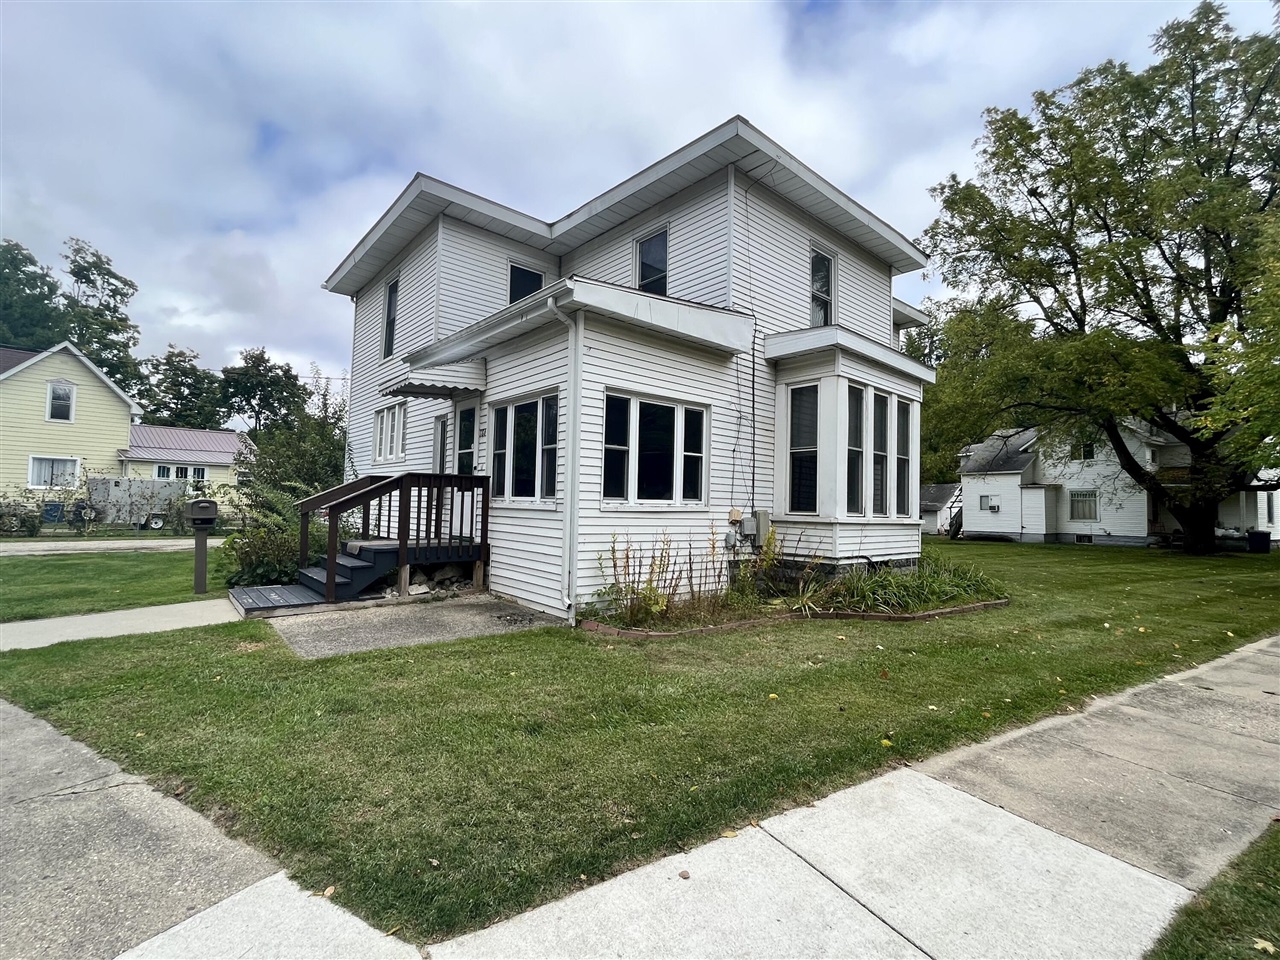 Take a look at this move in ready home with 3 bedrooms, 2 full bathrooms. Home features central air-conditioning, replacement windows, enclosed porch, covered porch, storage shed, laundry room, kitchen pantry, hardwood floors, new carpet and more. Give us a call today to take a look!